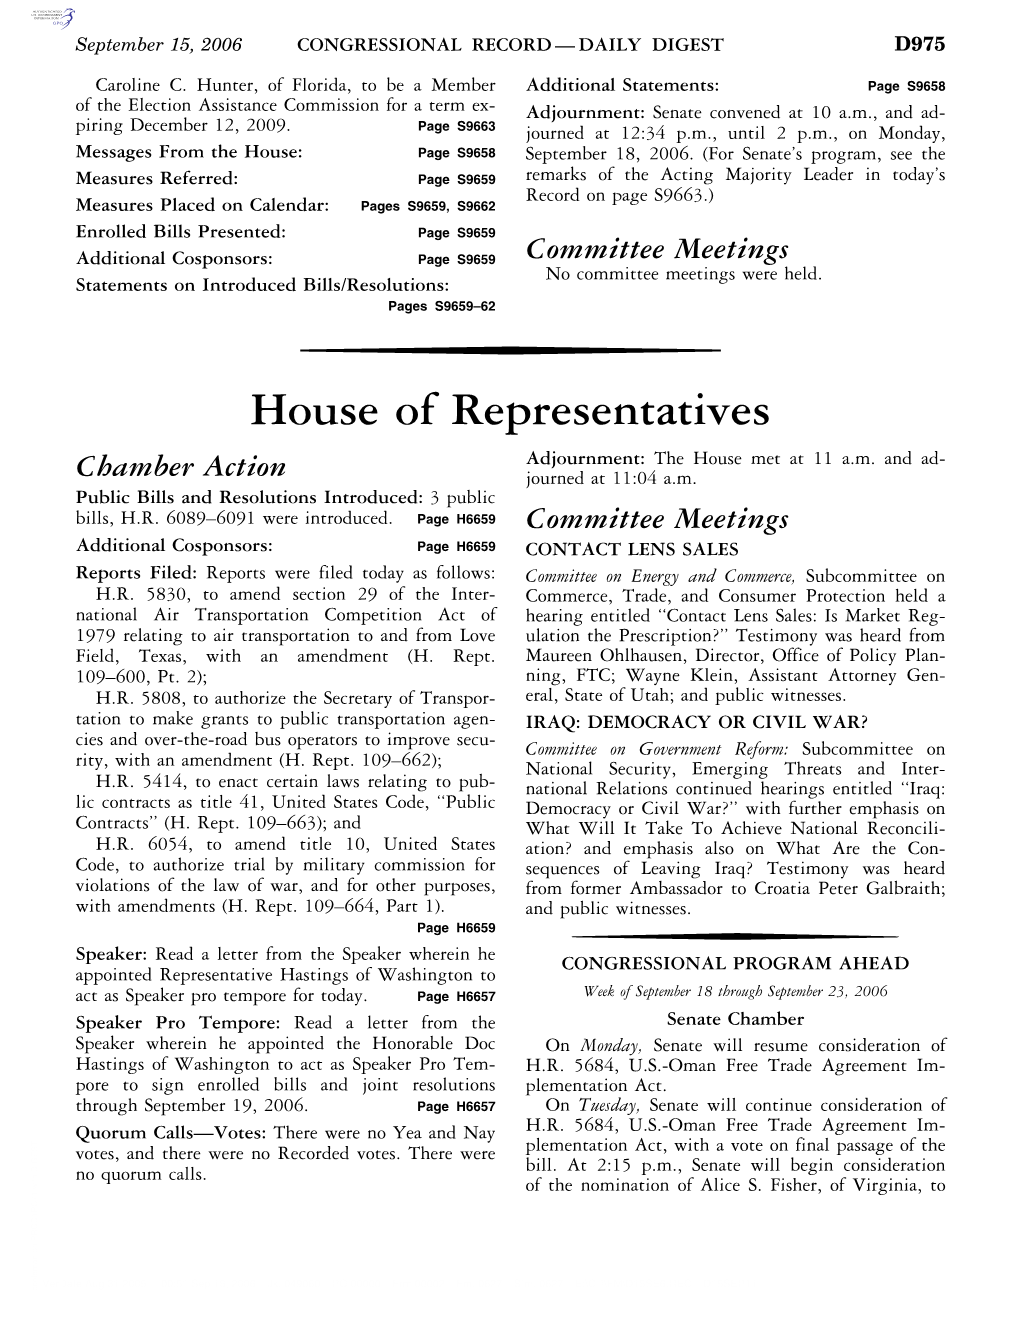 House of Representatives Adjournment: the House Met at 11 A.M